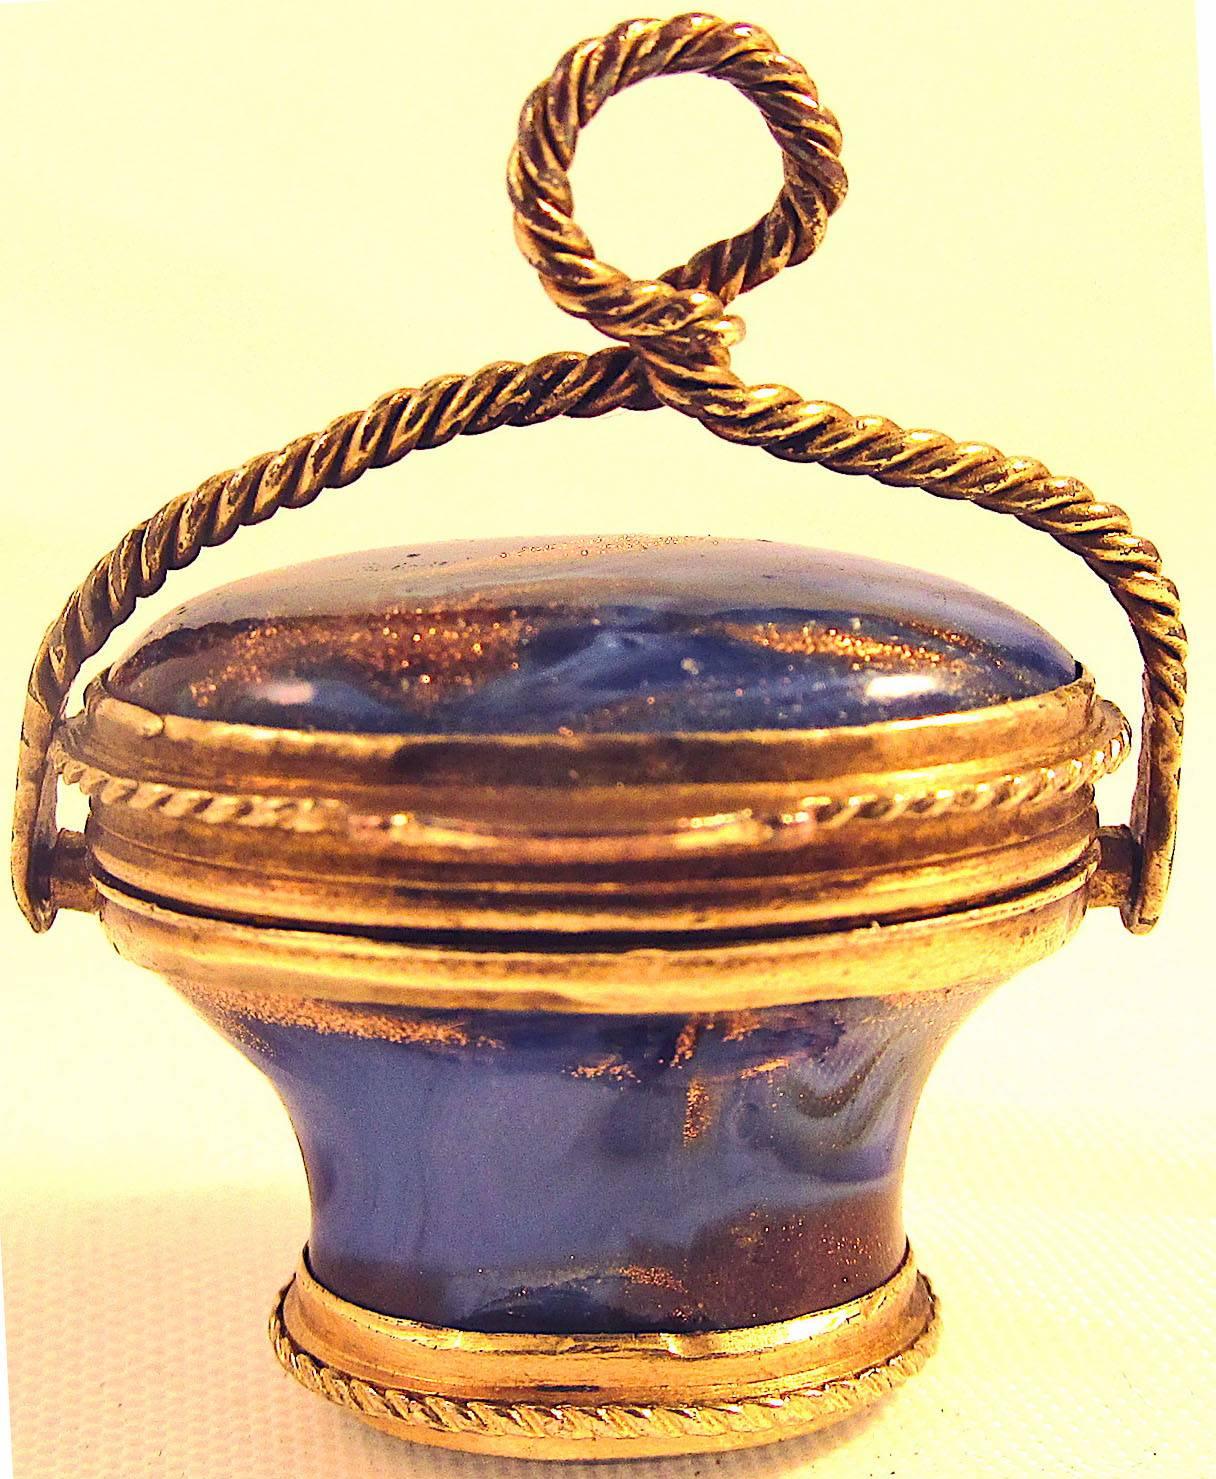 Lovely Georgian basket fob carved of lapis lazuli with pinchbeck fittings. This beautiful piece would have been worn by either a man or woman on their watch chain or sewing etui. It was likely used to store snuff. It measures 1" wide by